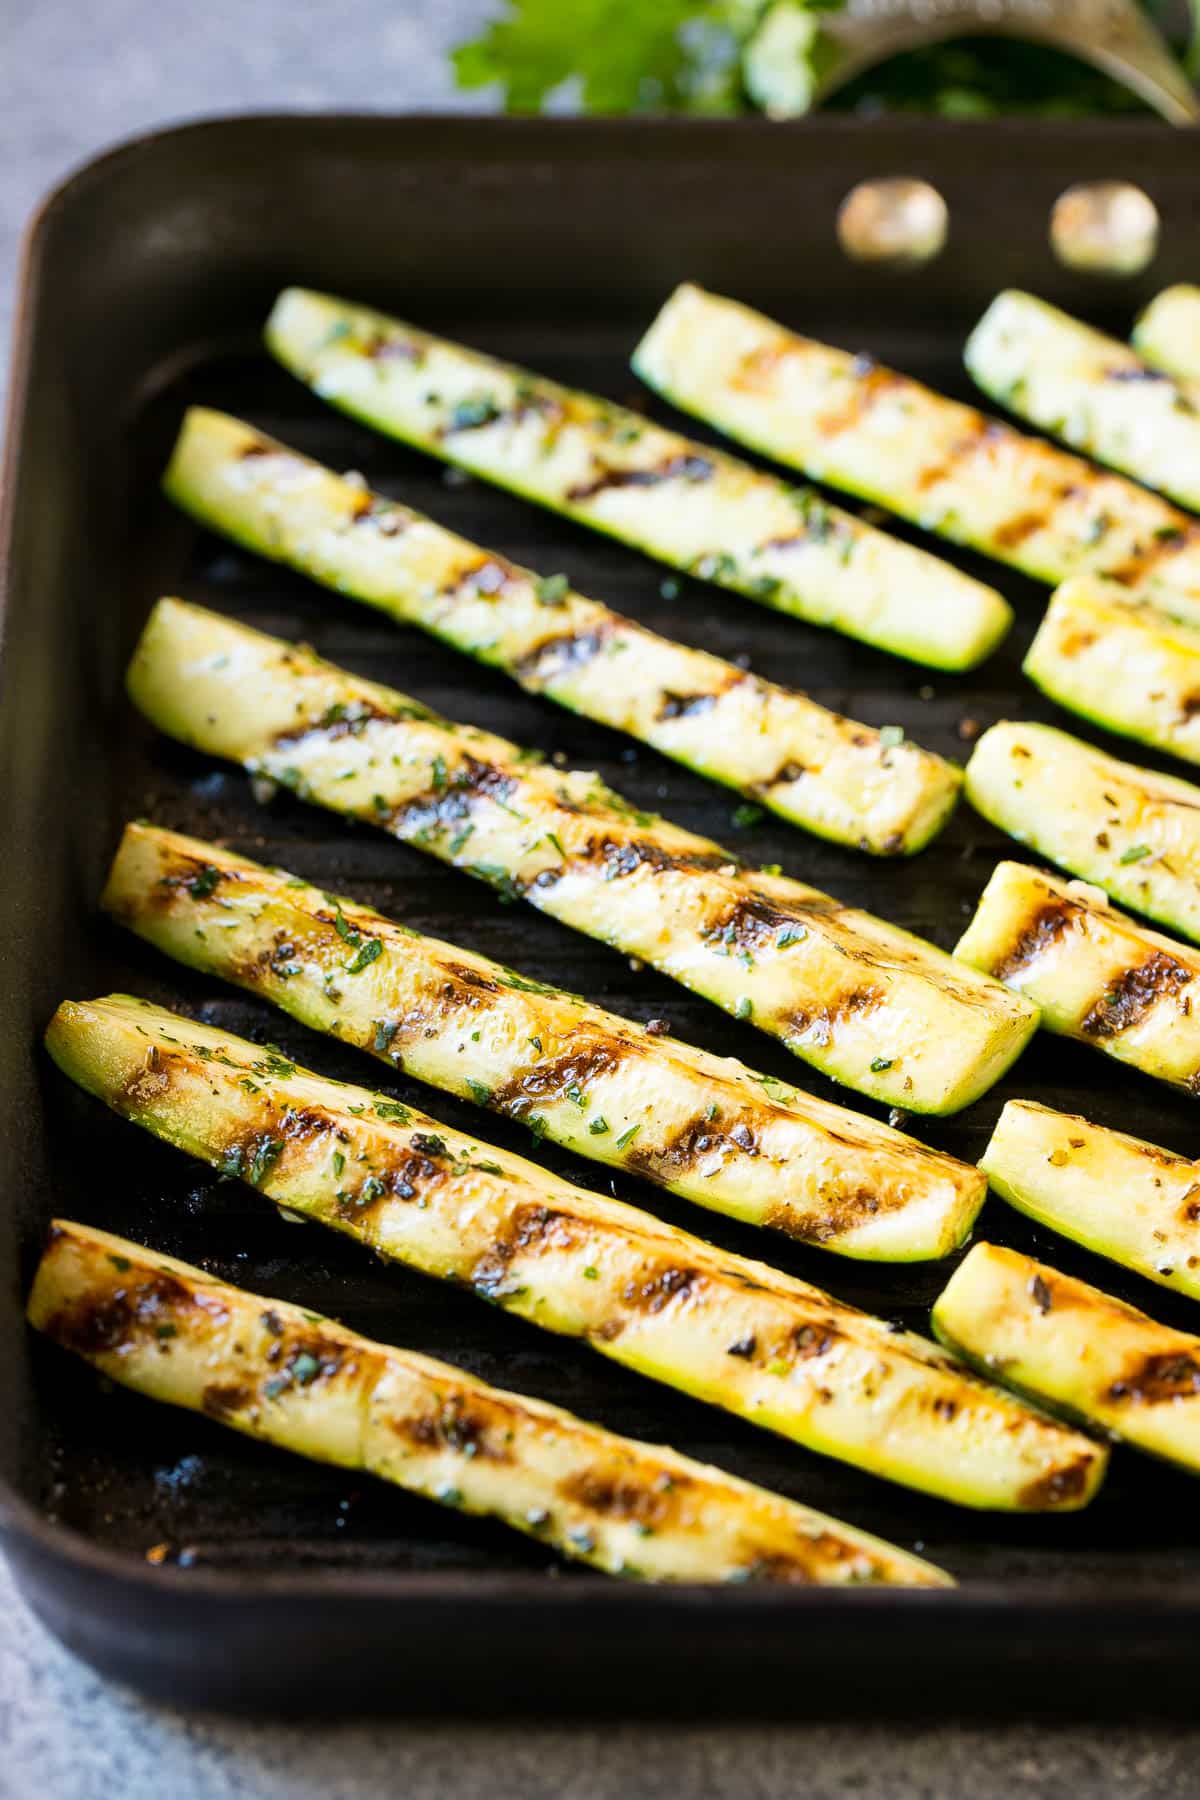 Zucchini spears cooked on a grill pan.